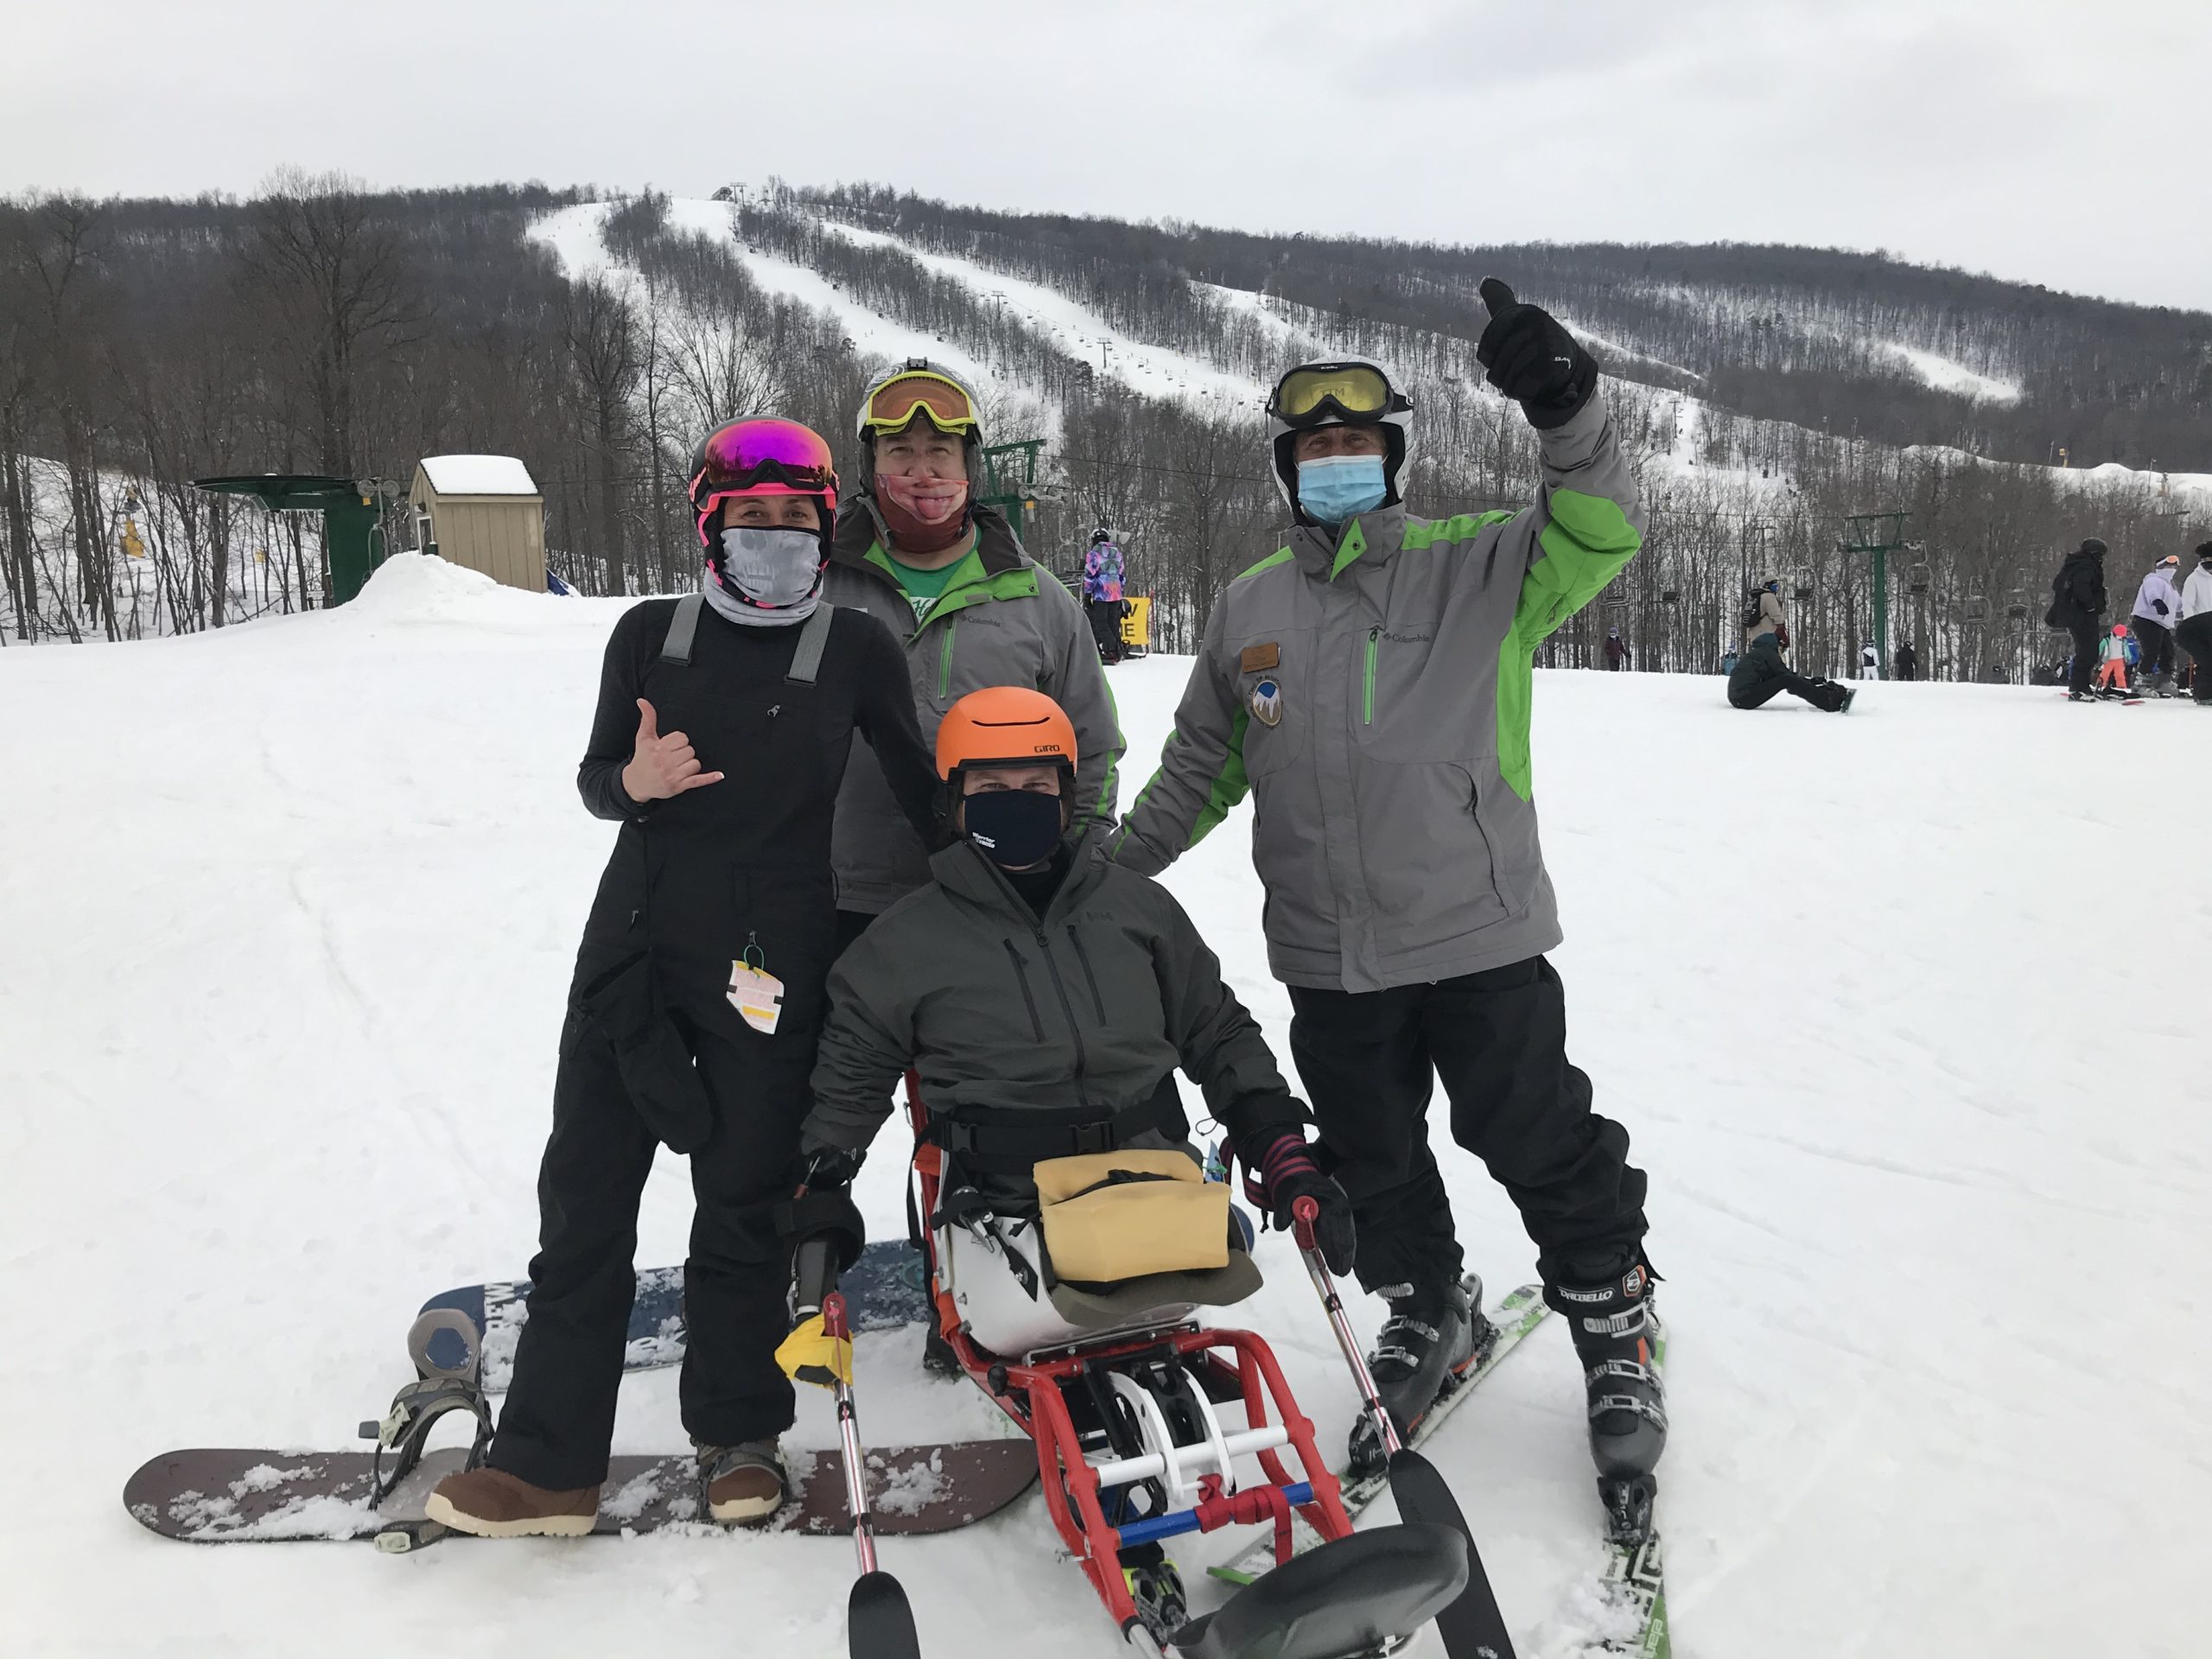 Group of athletes with snowboards, skis, and mono-skis smiling at the camera and giving a thumbs up